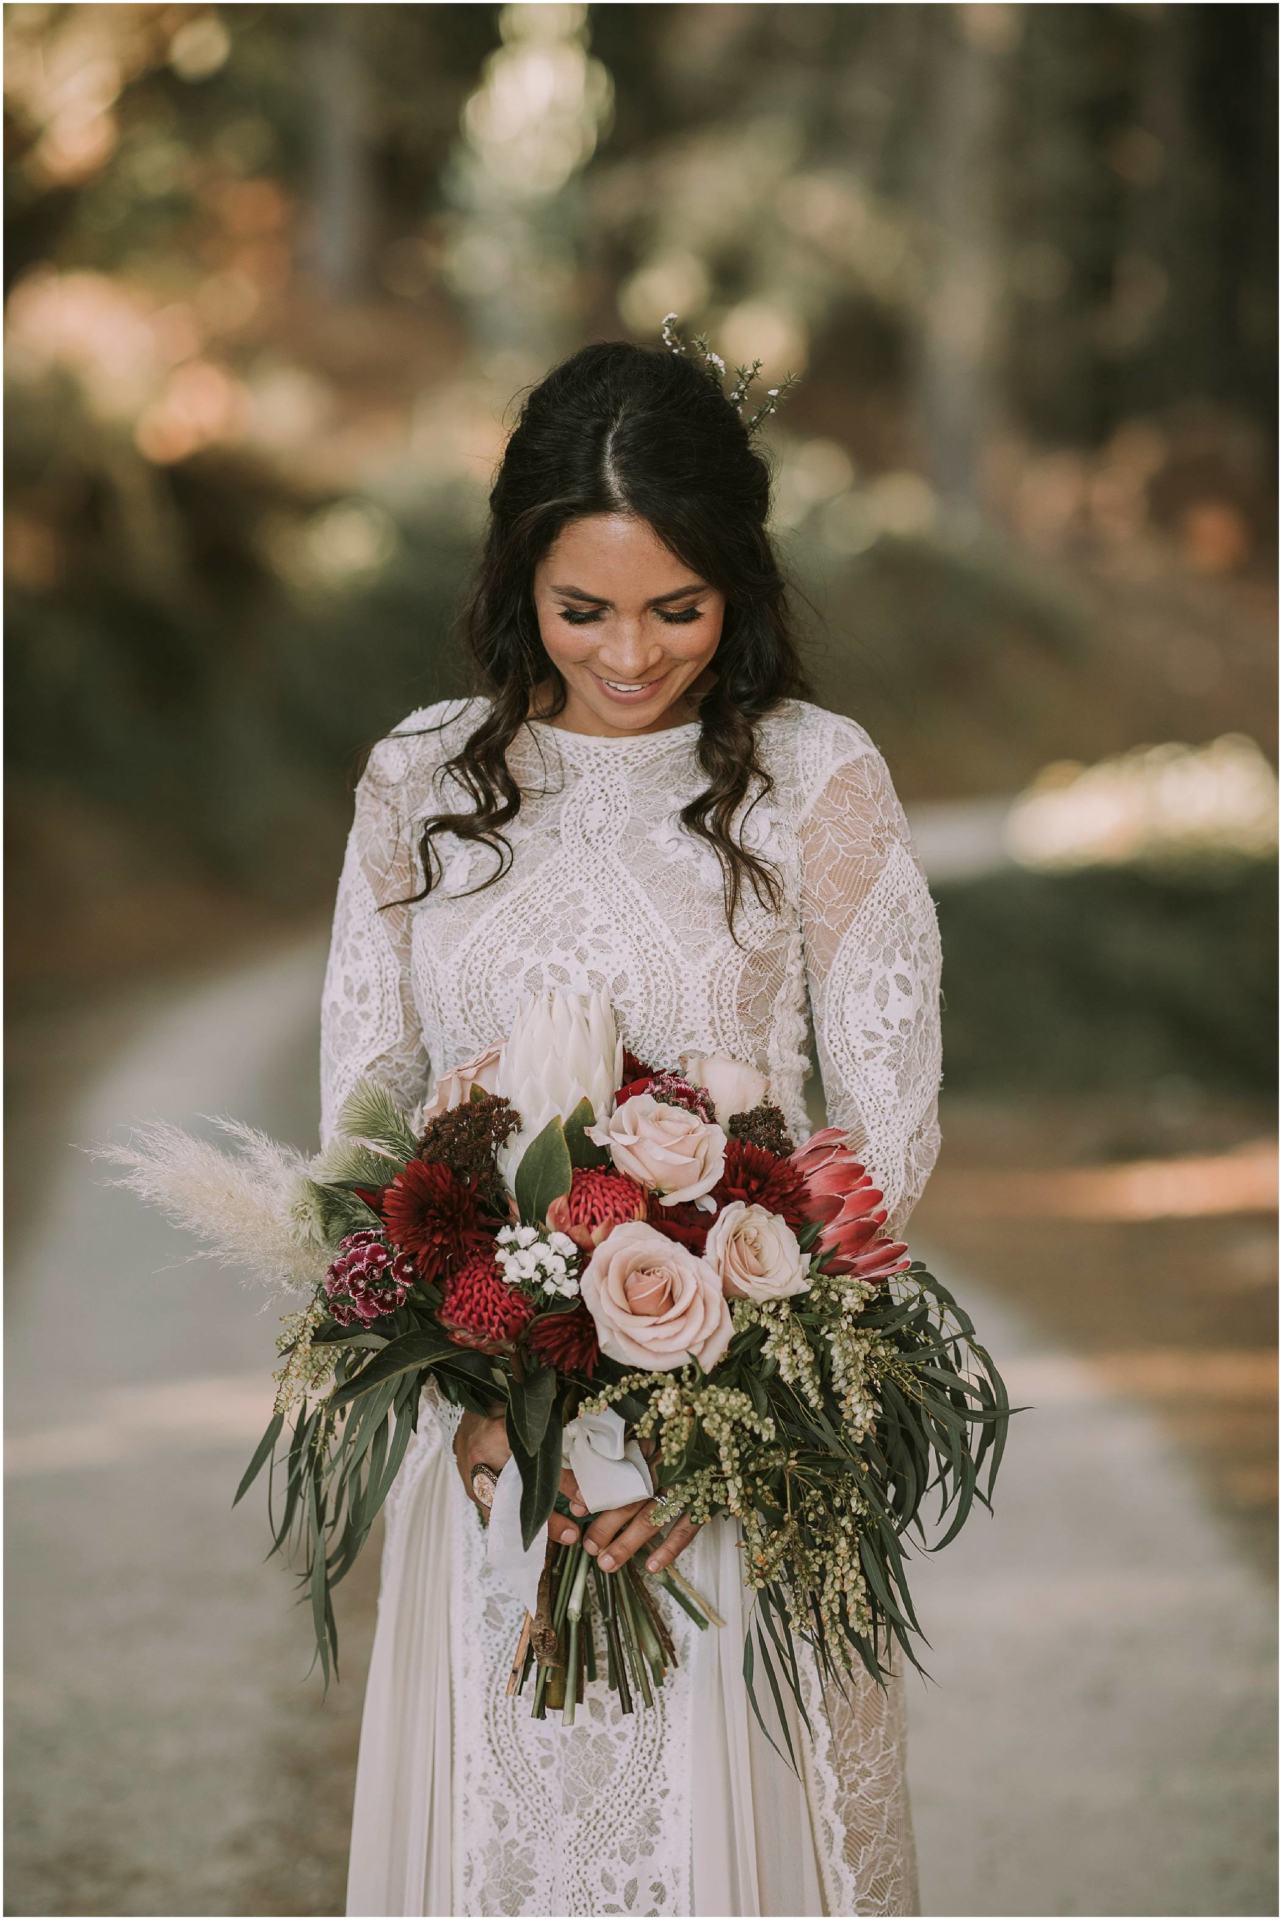 Charlotte Kiri Photography - Wedding Photography of a bride wearing a stunning high-neck vintage lace gown, and looking down at her rustic bouquet as she stands on a gravel road, in Lake Hawea, New Zealand.